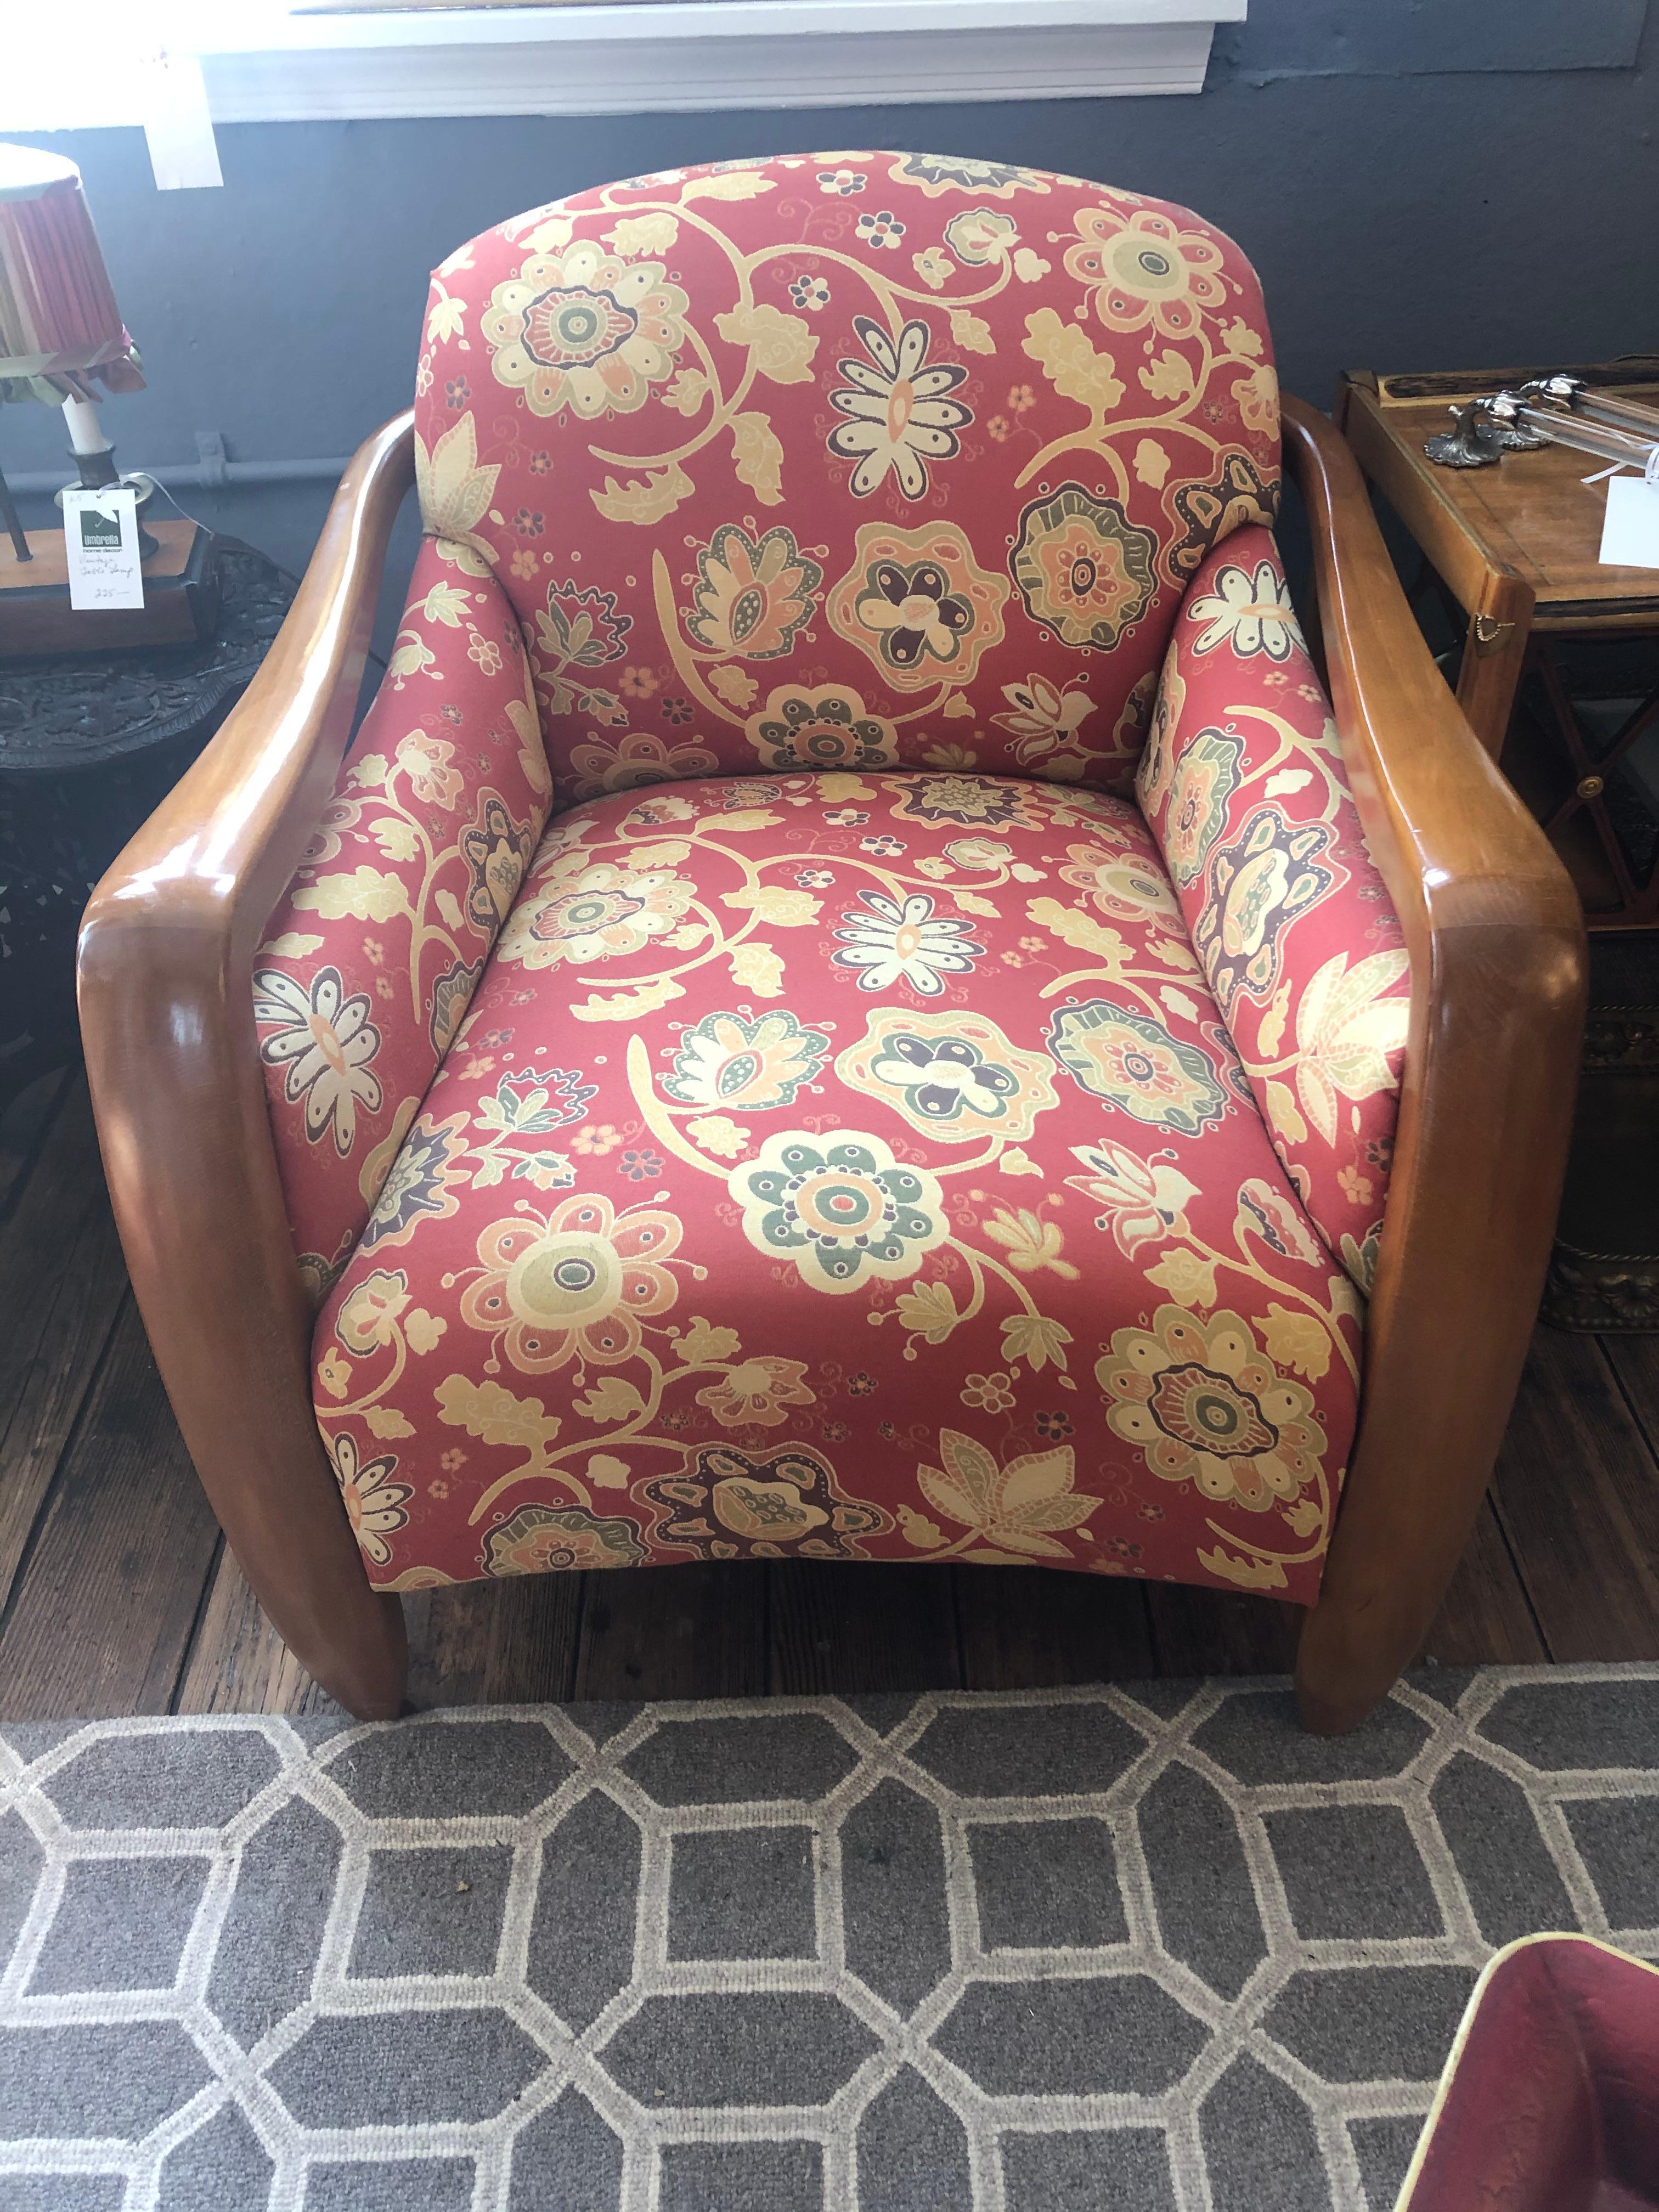 Welcoming Set of Classy Art Deco Club Chairs and Matching Ottoman 1